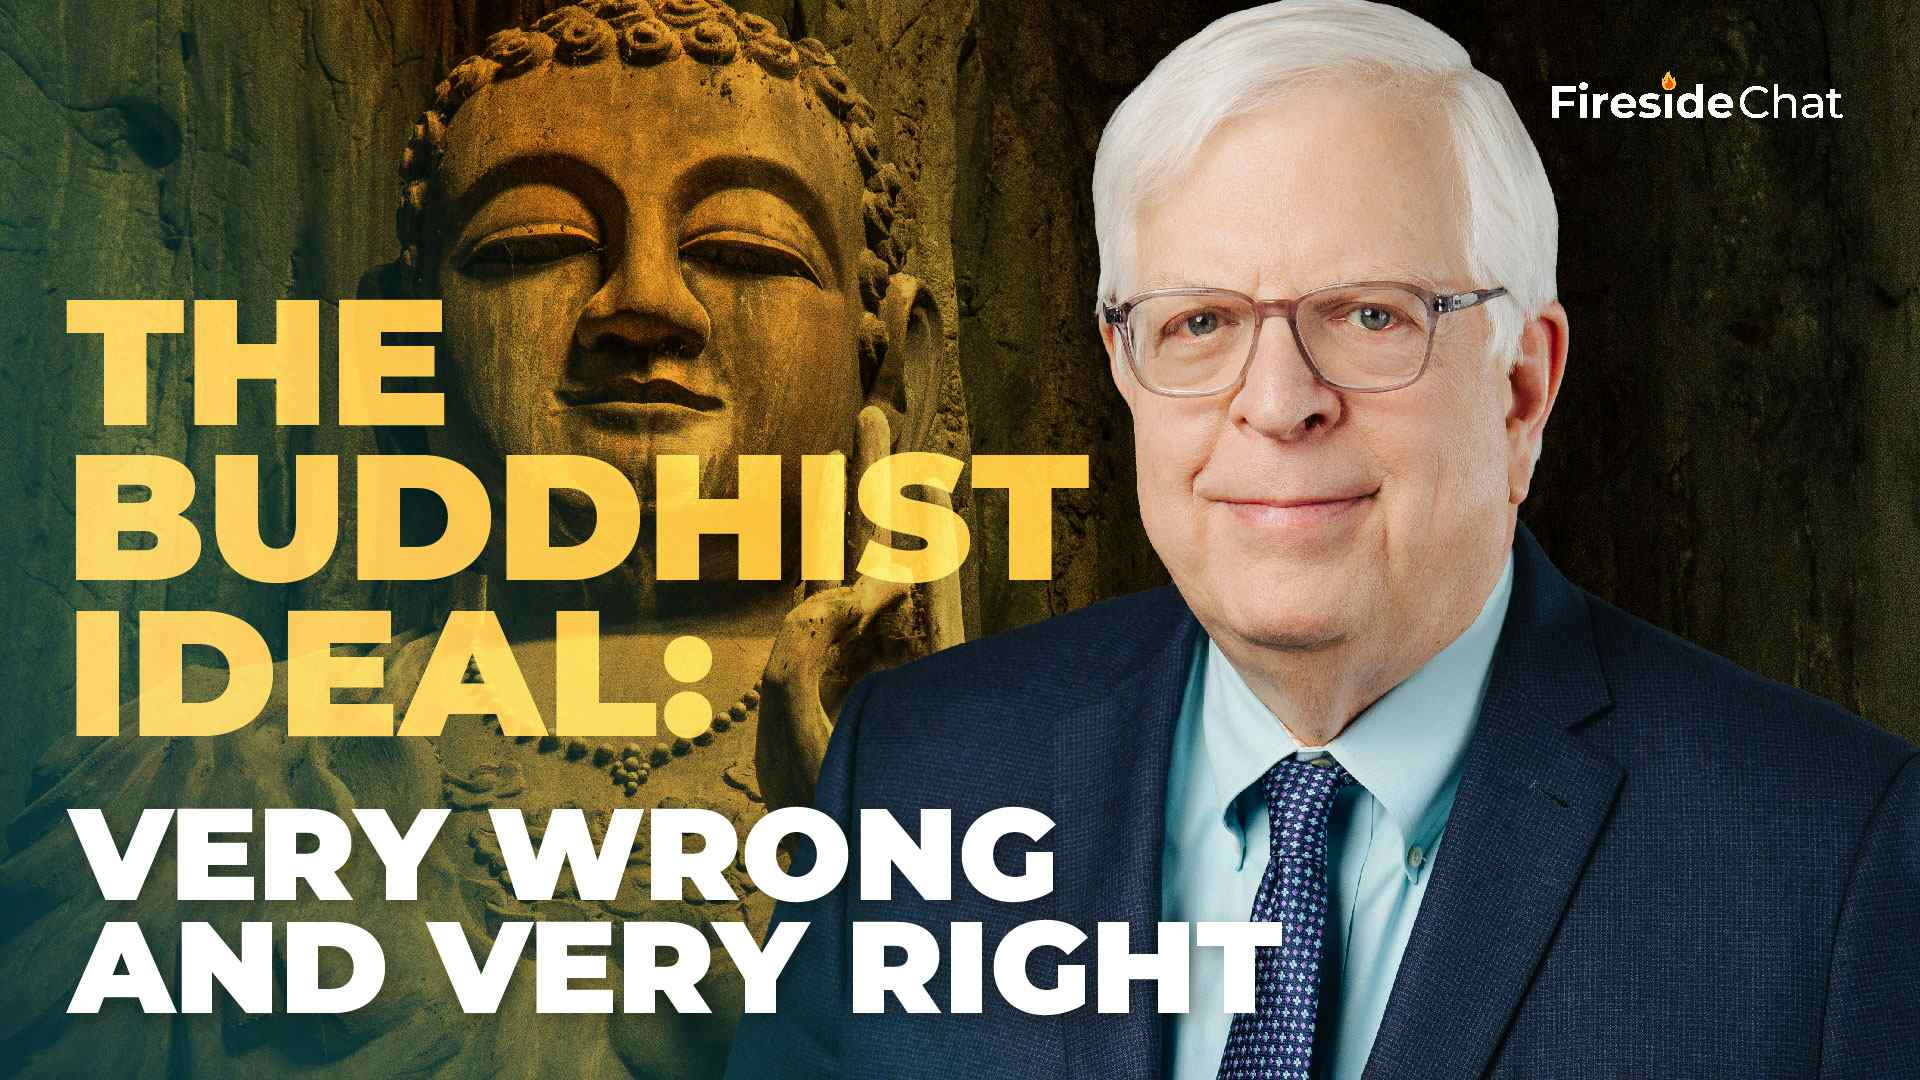 The Buddhist Ideal: Very Wrong and Very Right